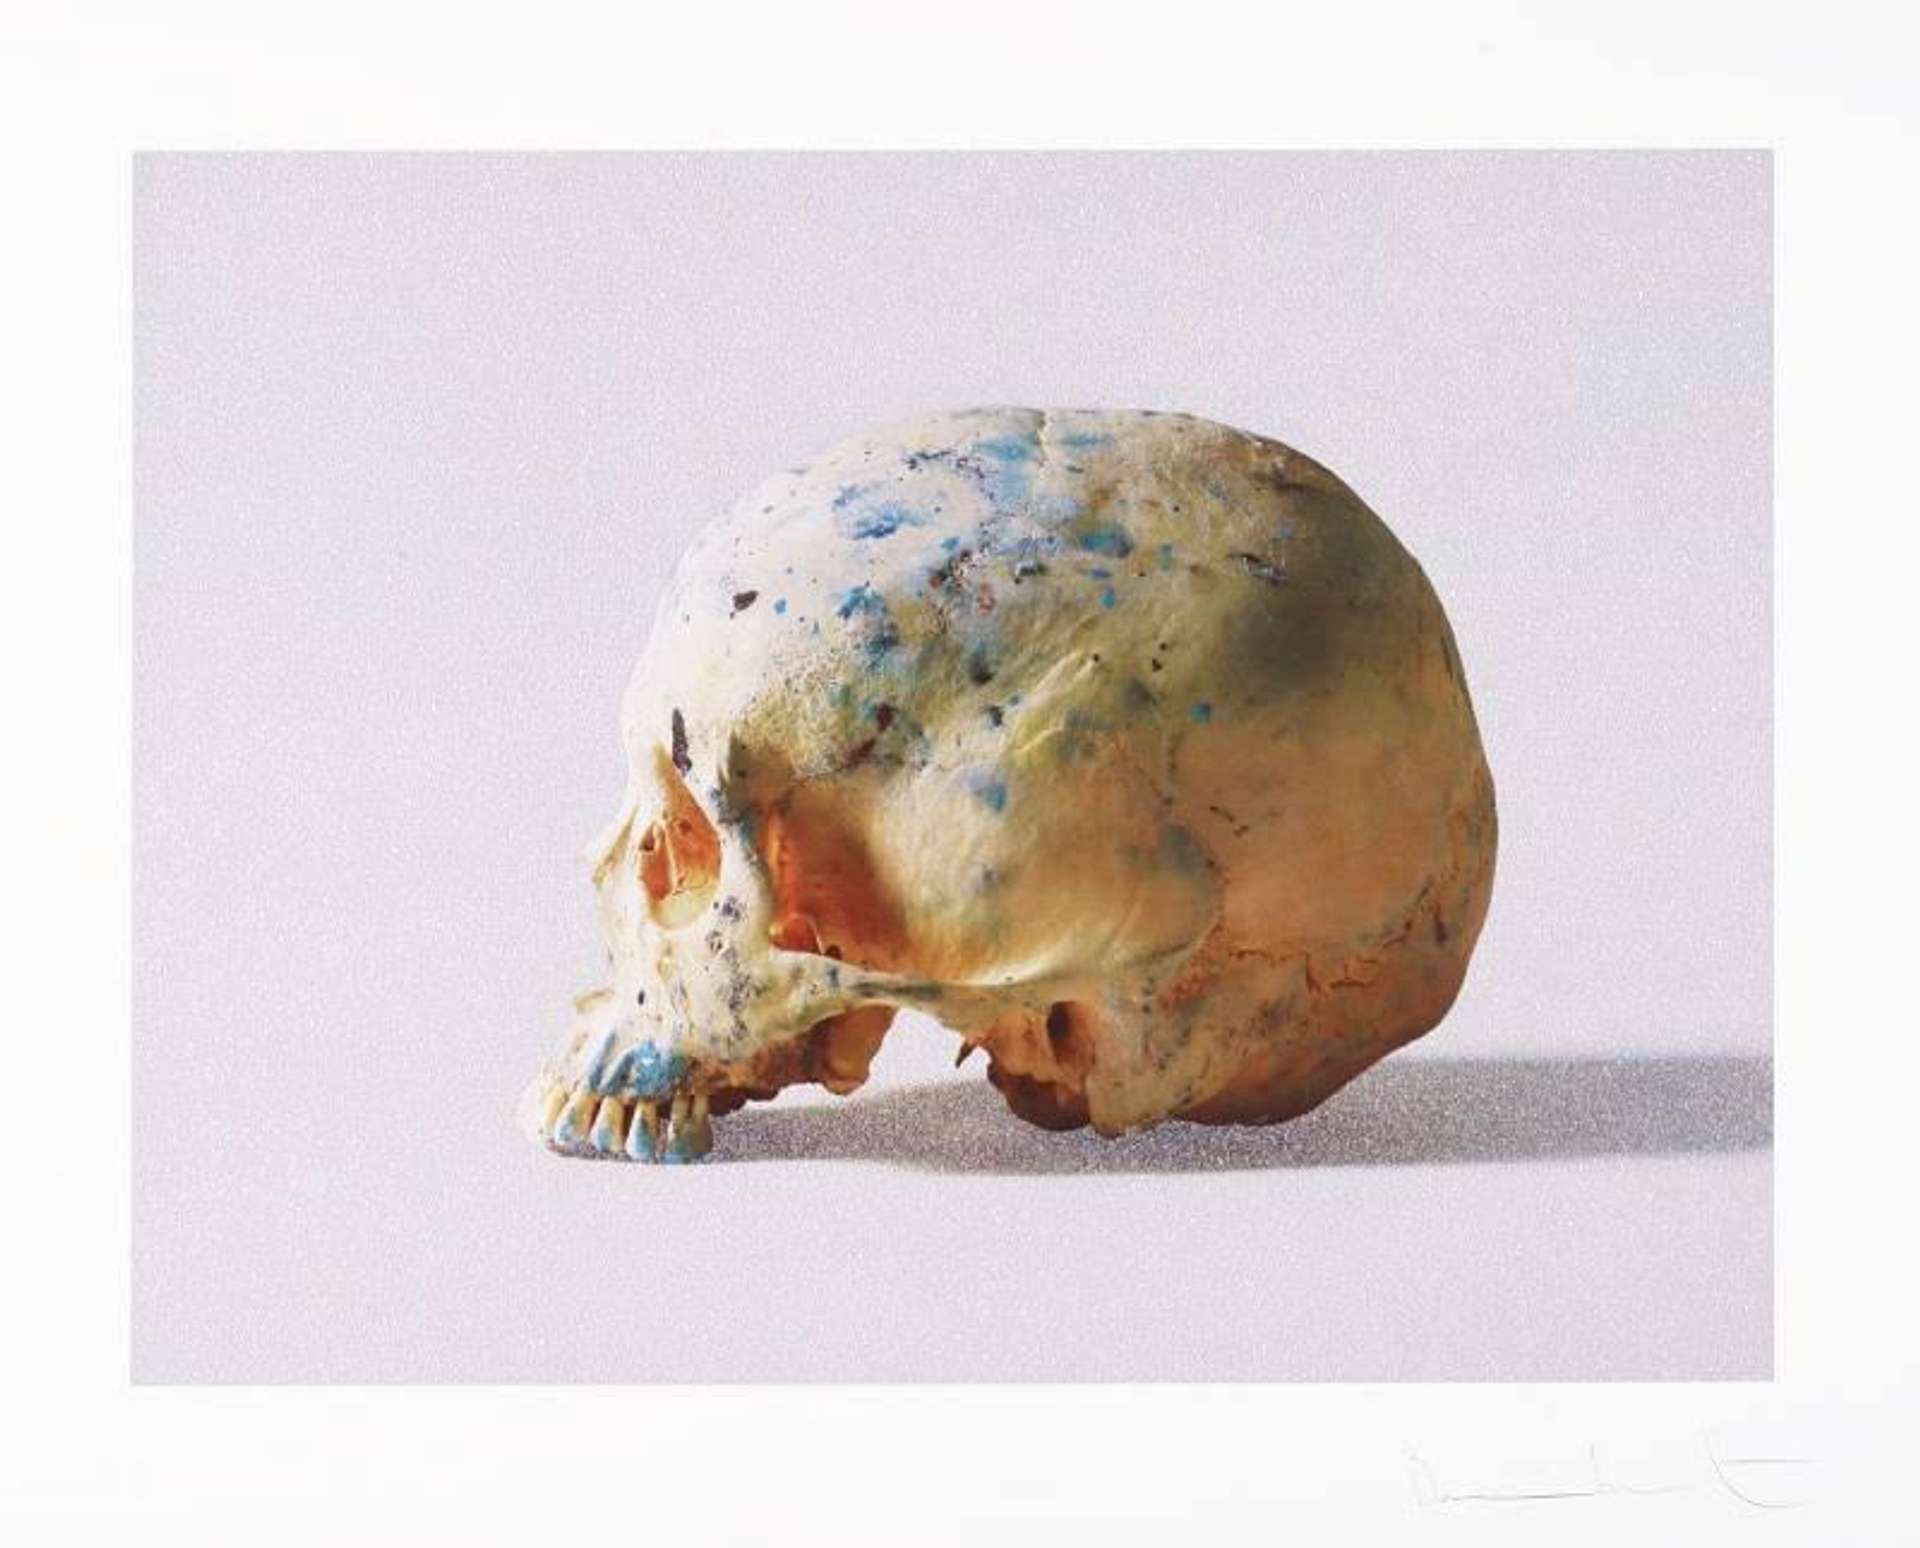 The work shows the profile of a skull, facing the viewer’s left. The skull is photographed in the centre of the composition against a white backdrop, making it the focal point of the image. The skull is splattered with blue and green paint.